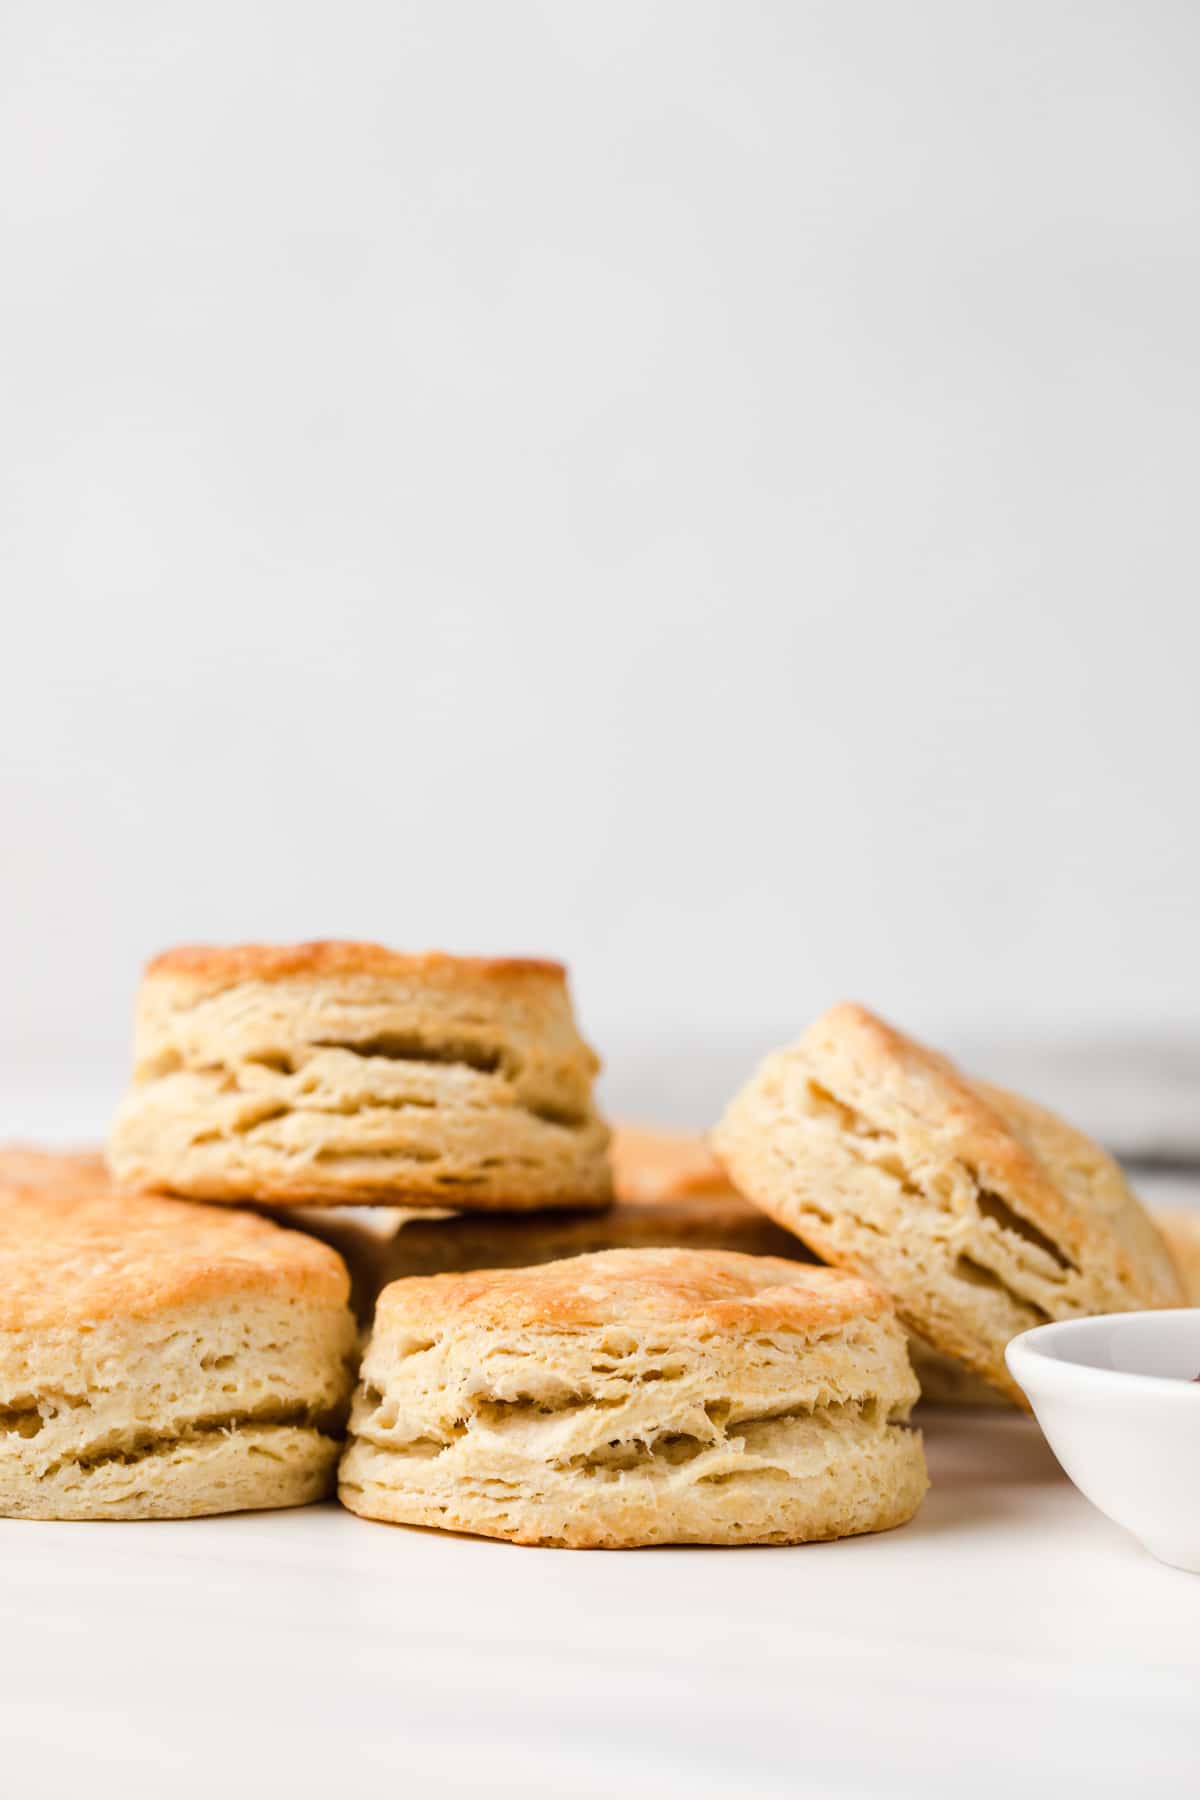 one biscuit stacked on single layer of biscuits